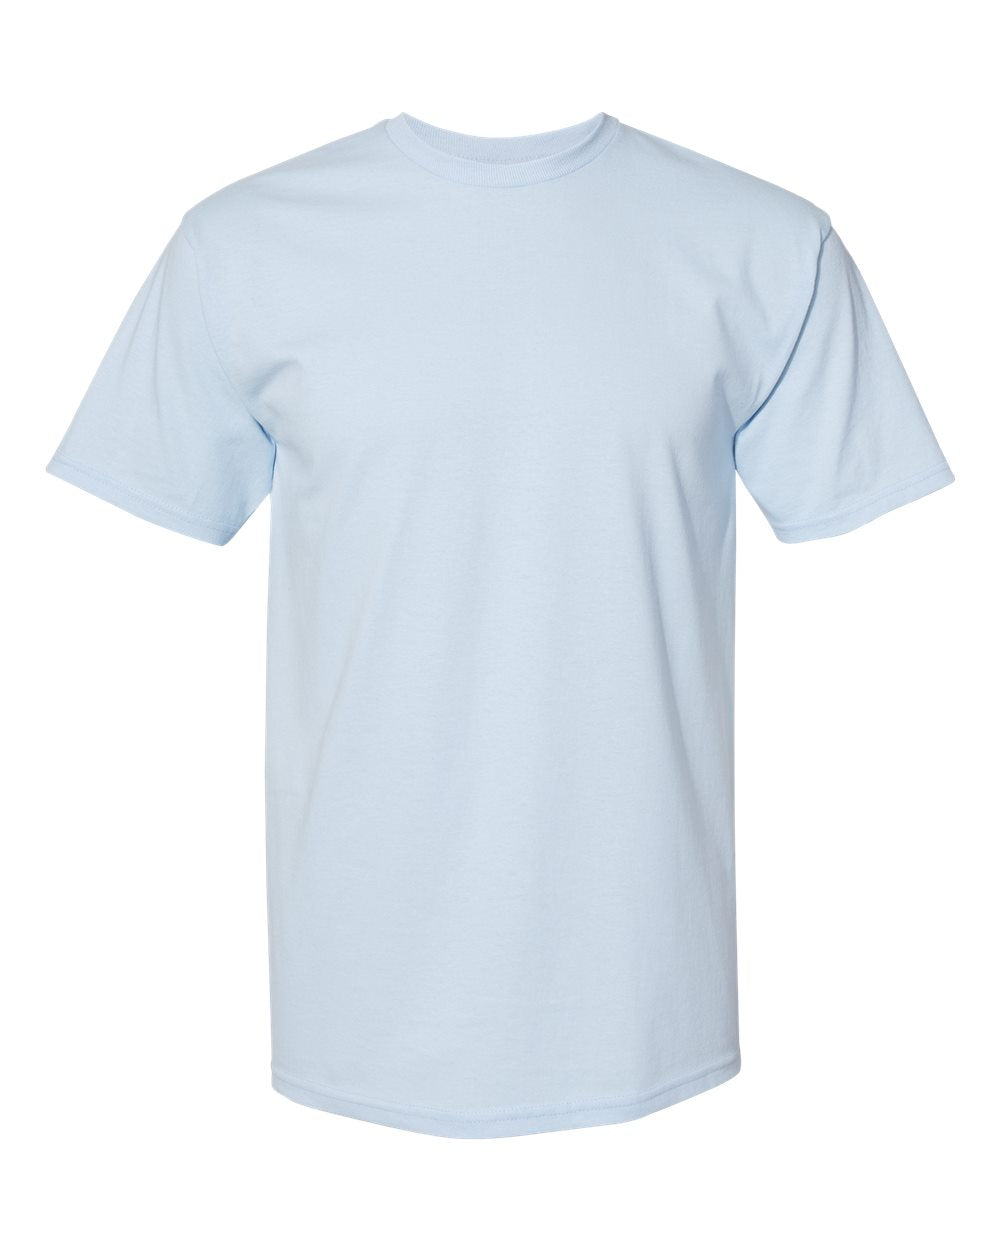 American Apparel Midweight Cotton Unisex Tee 1701 #color_Powder Blue